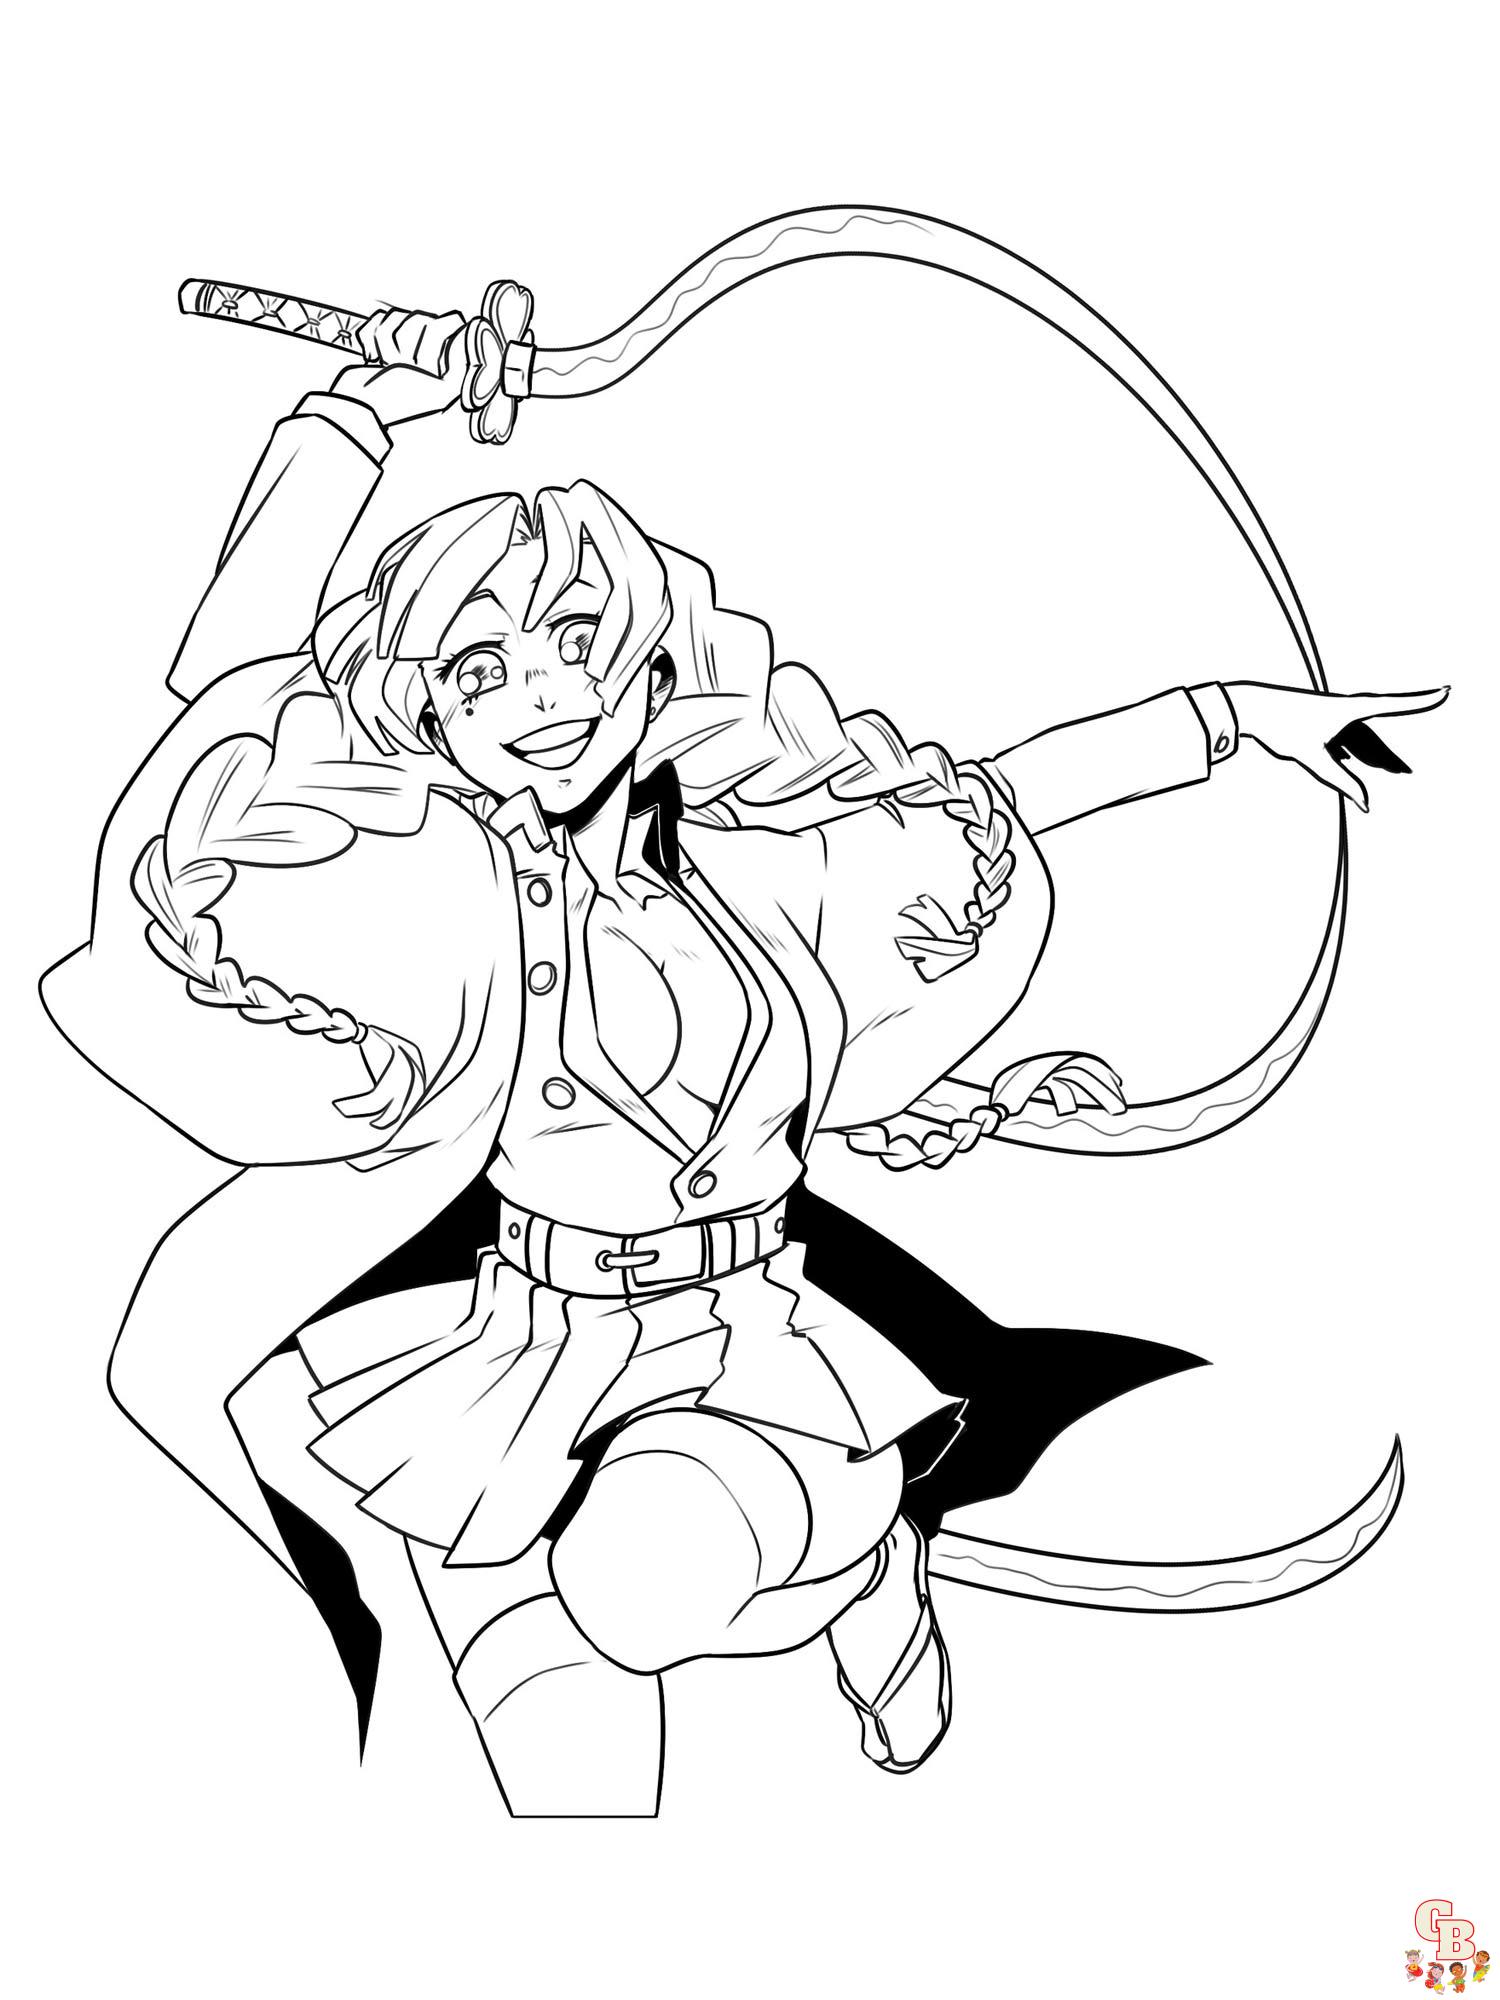 Demon slayer coloring pages printable free and easy